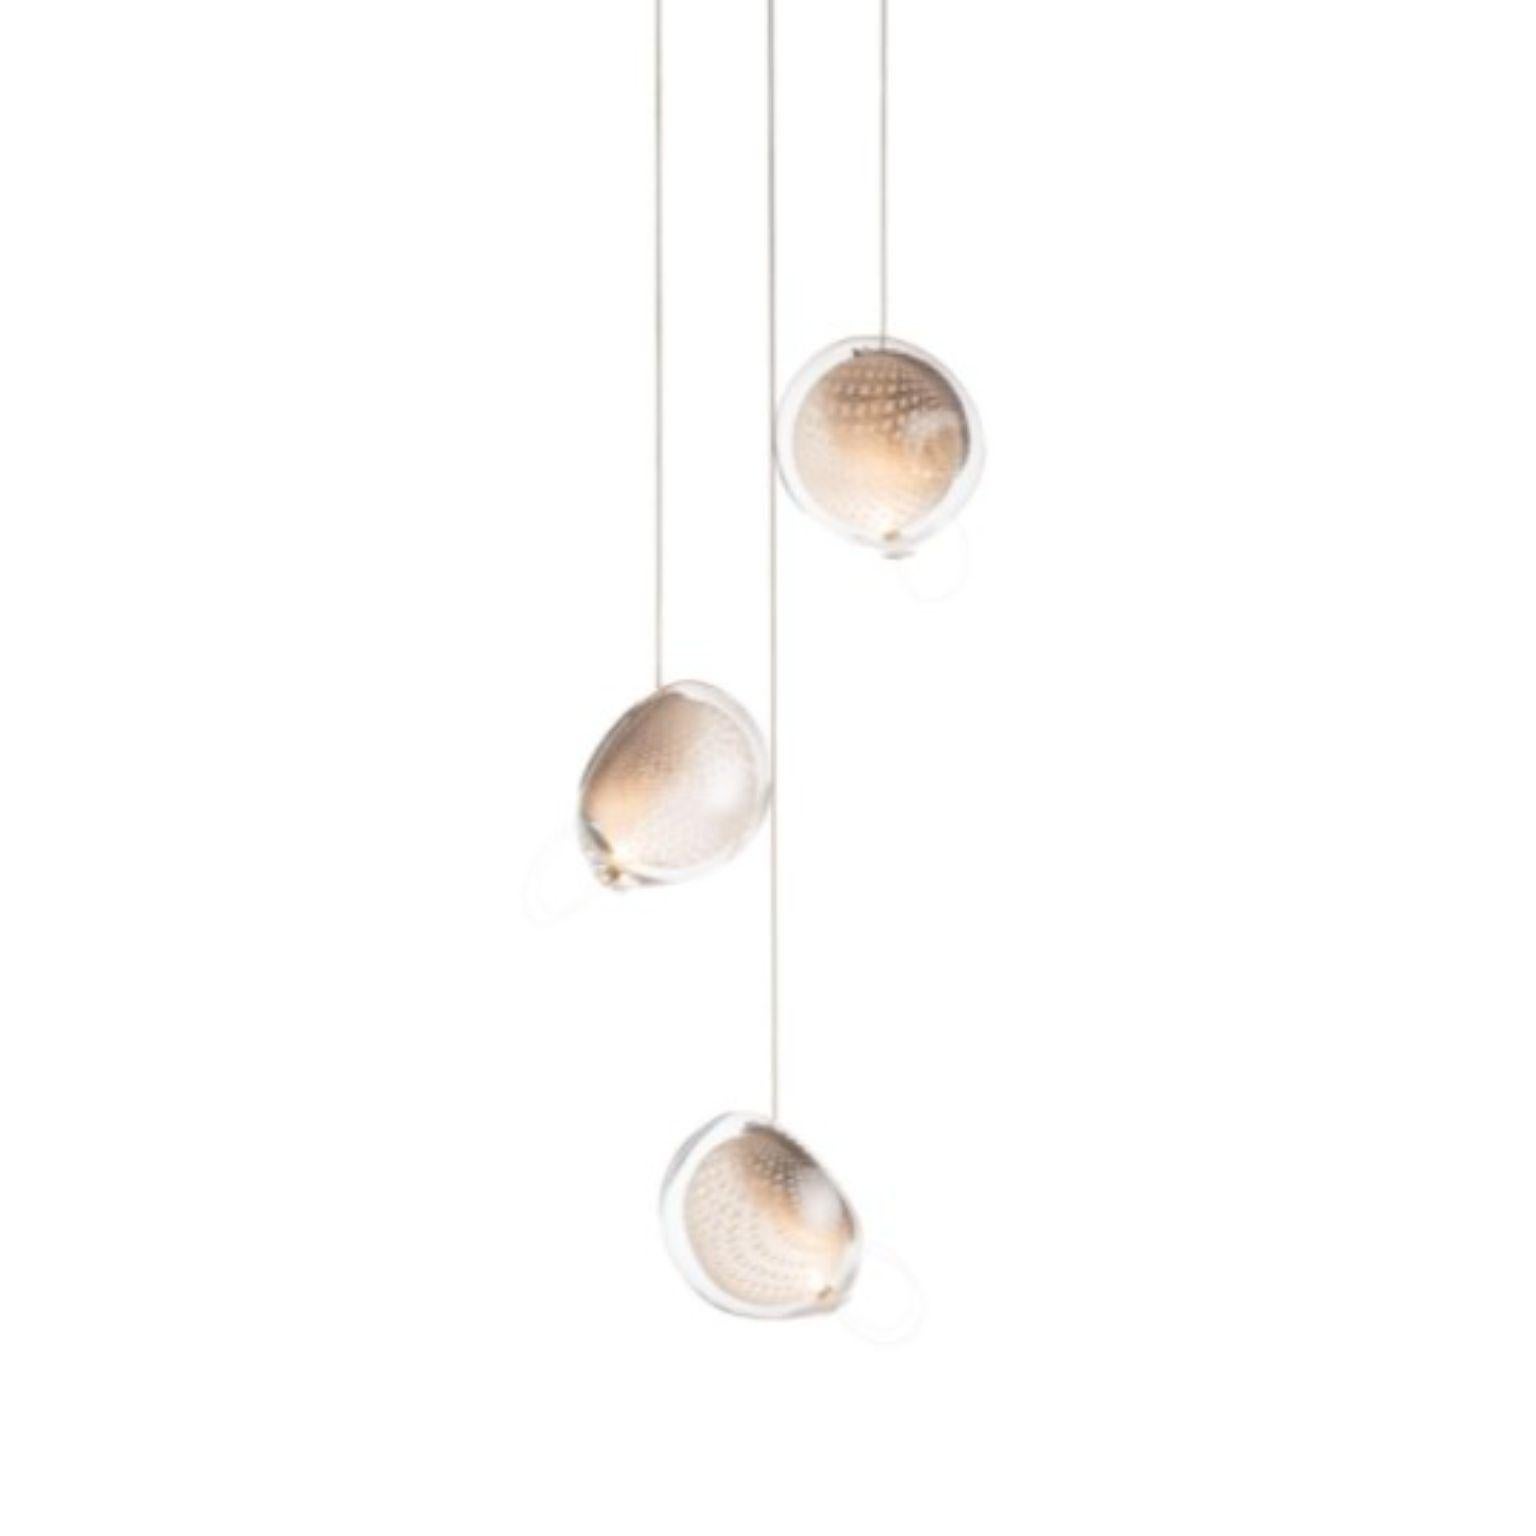 76.3 Pendant by Bocci
Dimensions: D 15.2 x H 300 cm
Materials: brushed nickel round canopy
Weight: 2 kg
Also available in different dimensions.

All our lamps can be wired according to each country. If sold to the USA it will be wired for the